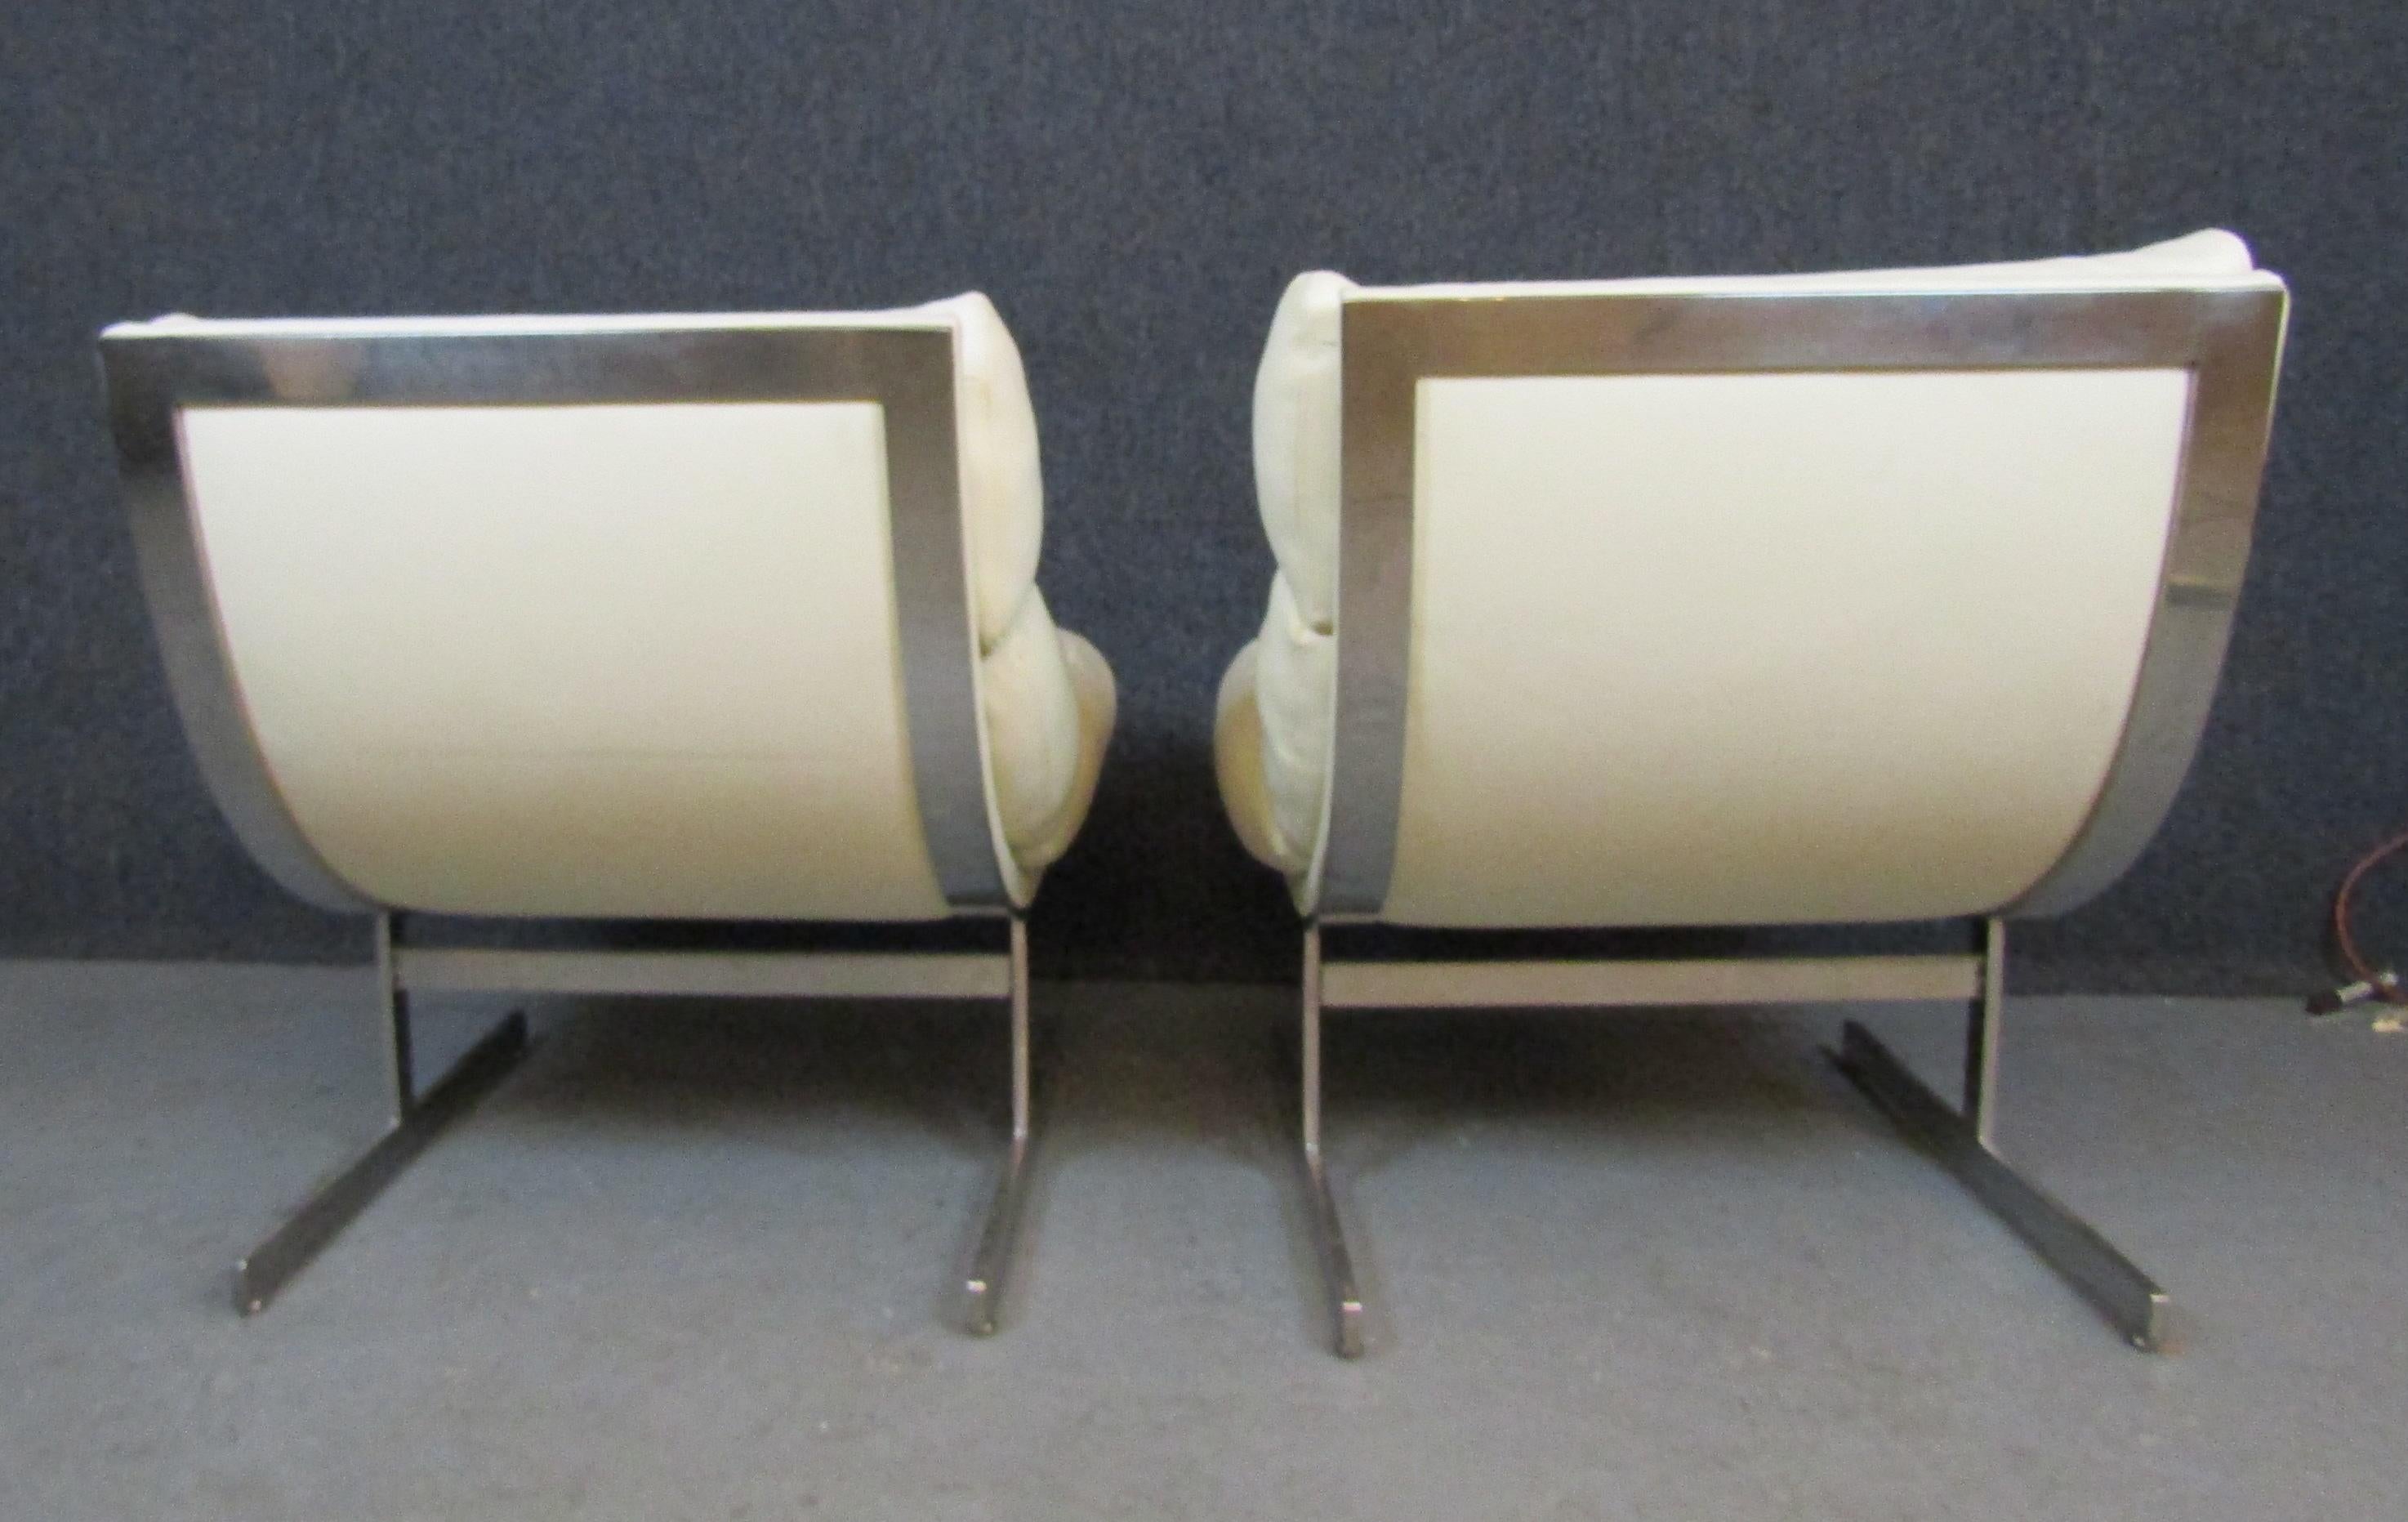 Pair of spectacular mid-century modern lounge chairs designed by Kipp Stewart. Scoop frame with soft leather set on polished chrome.
Please confirm location NY or NJ